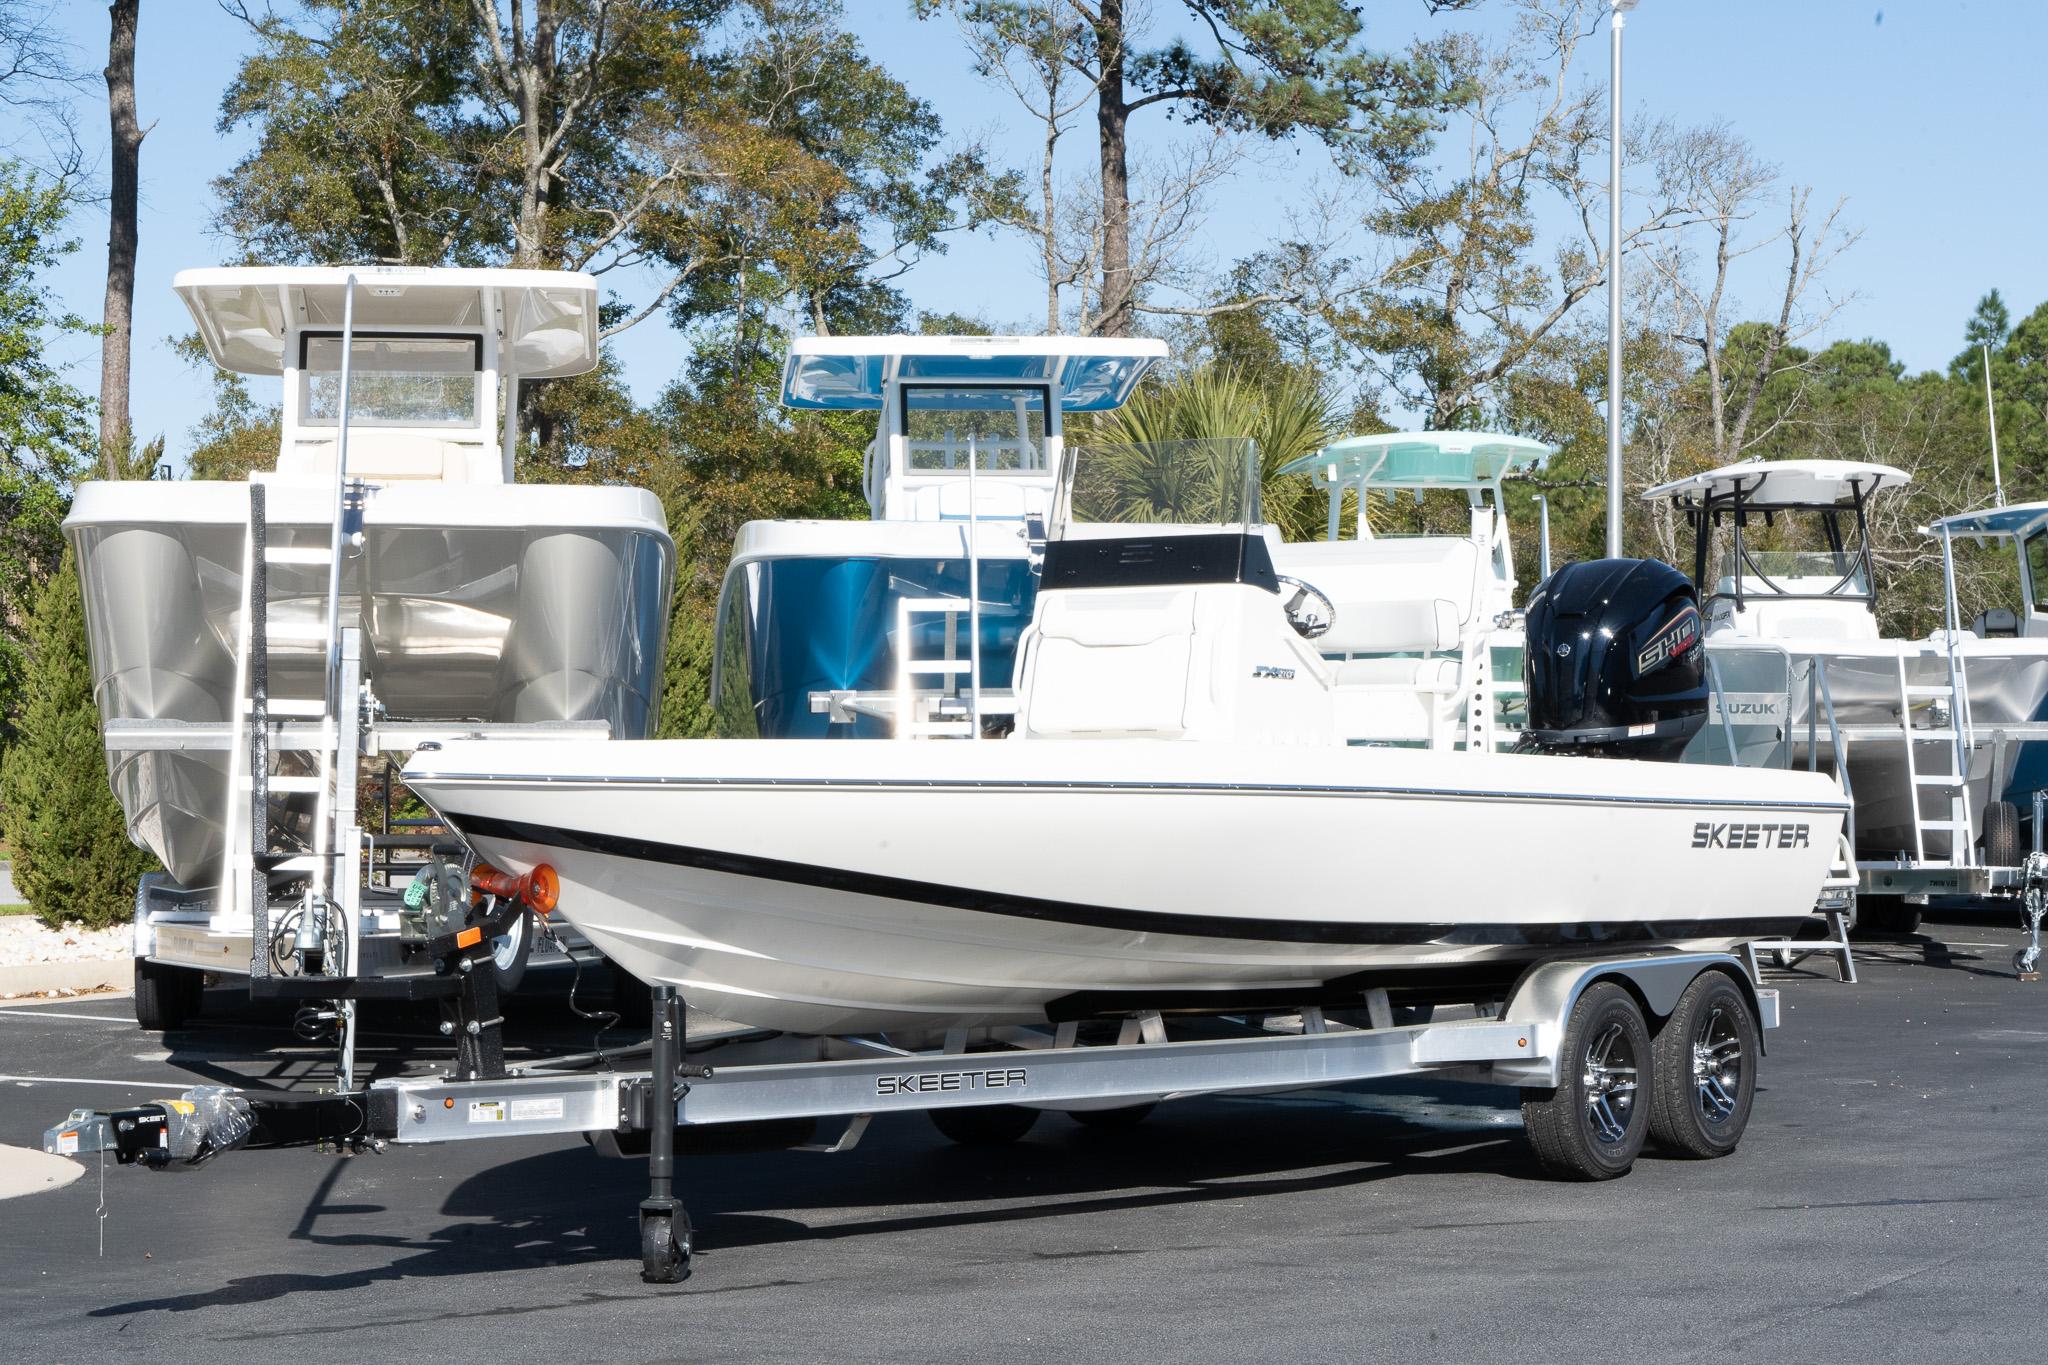 Explore Skeeter Zx 2250 Boats For Sale - Boat Trader